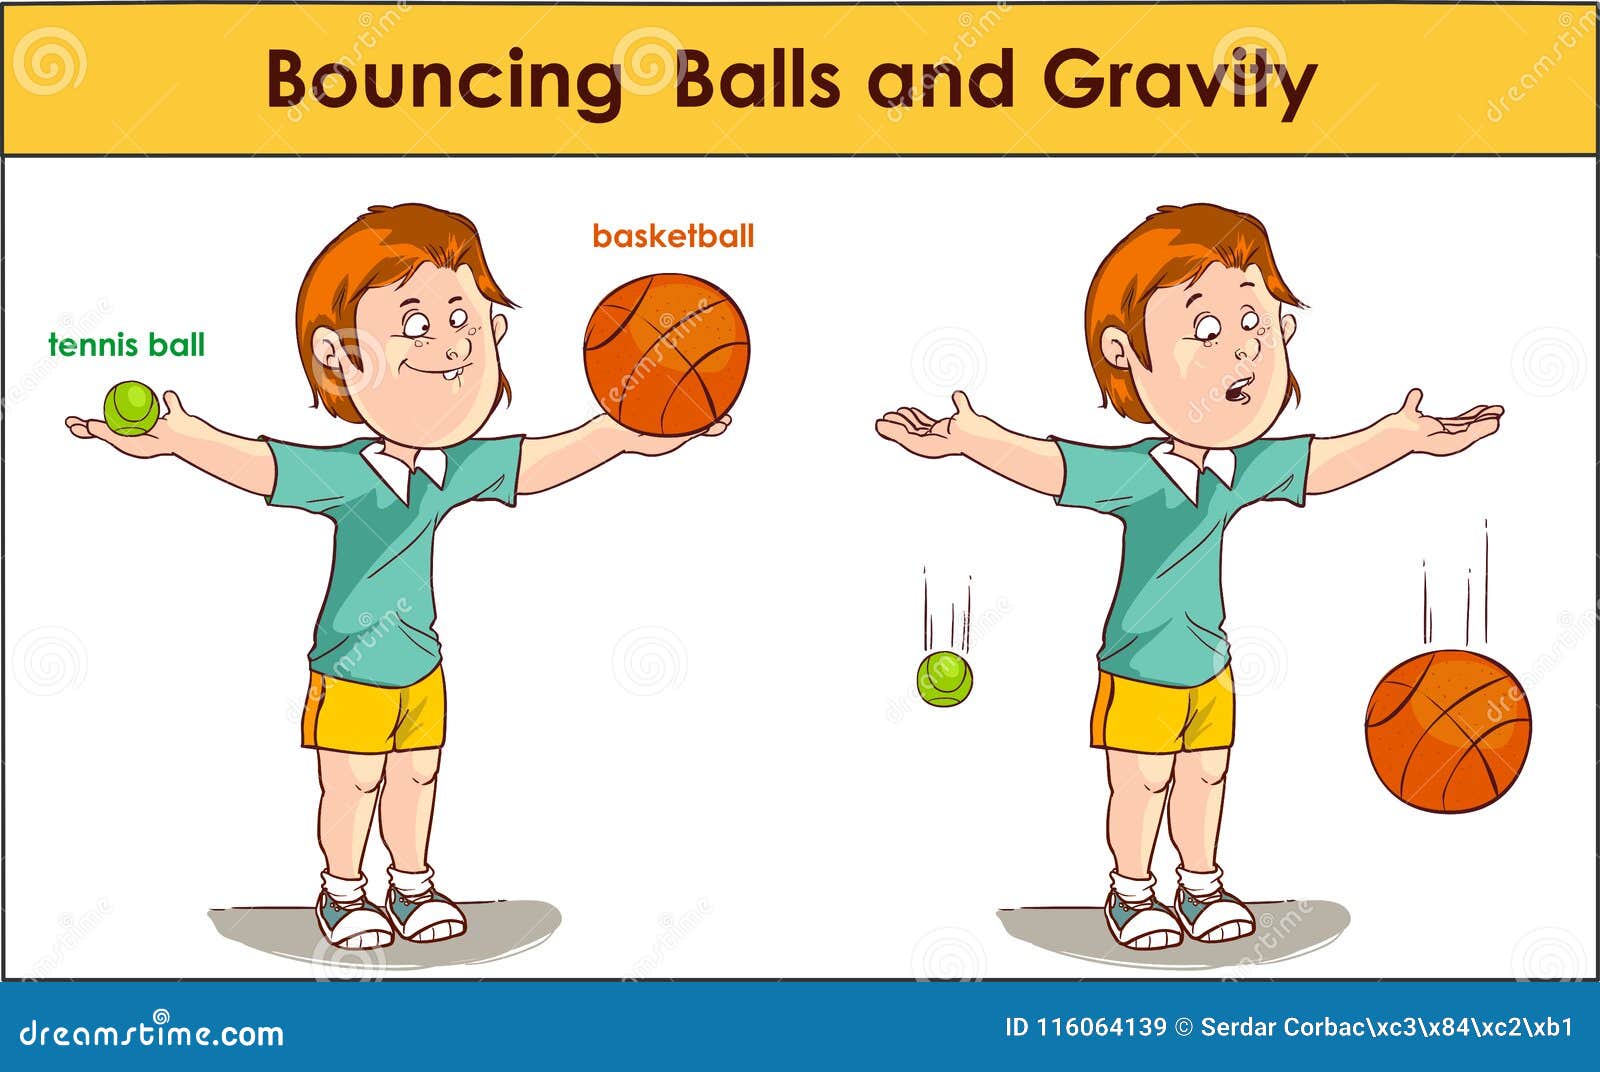   of a bouncing balls and gravity